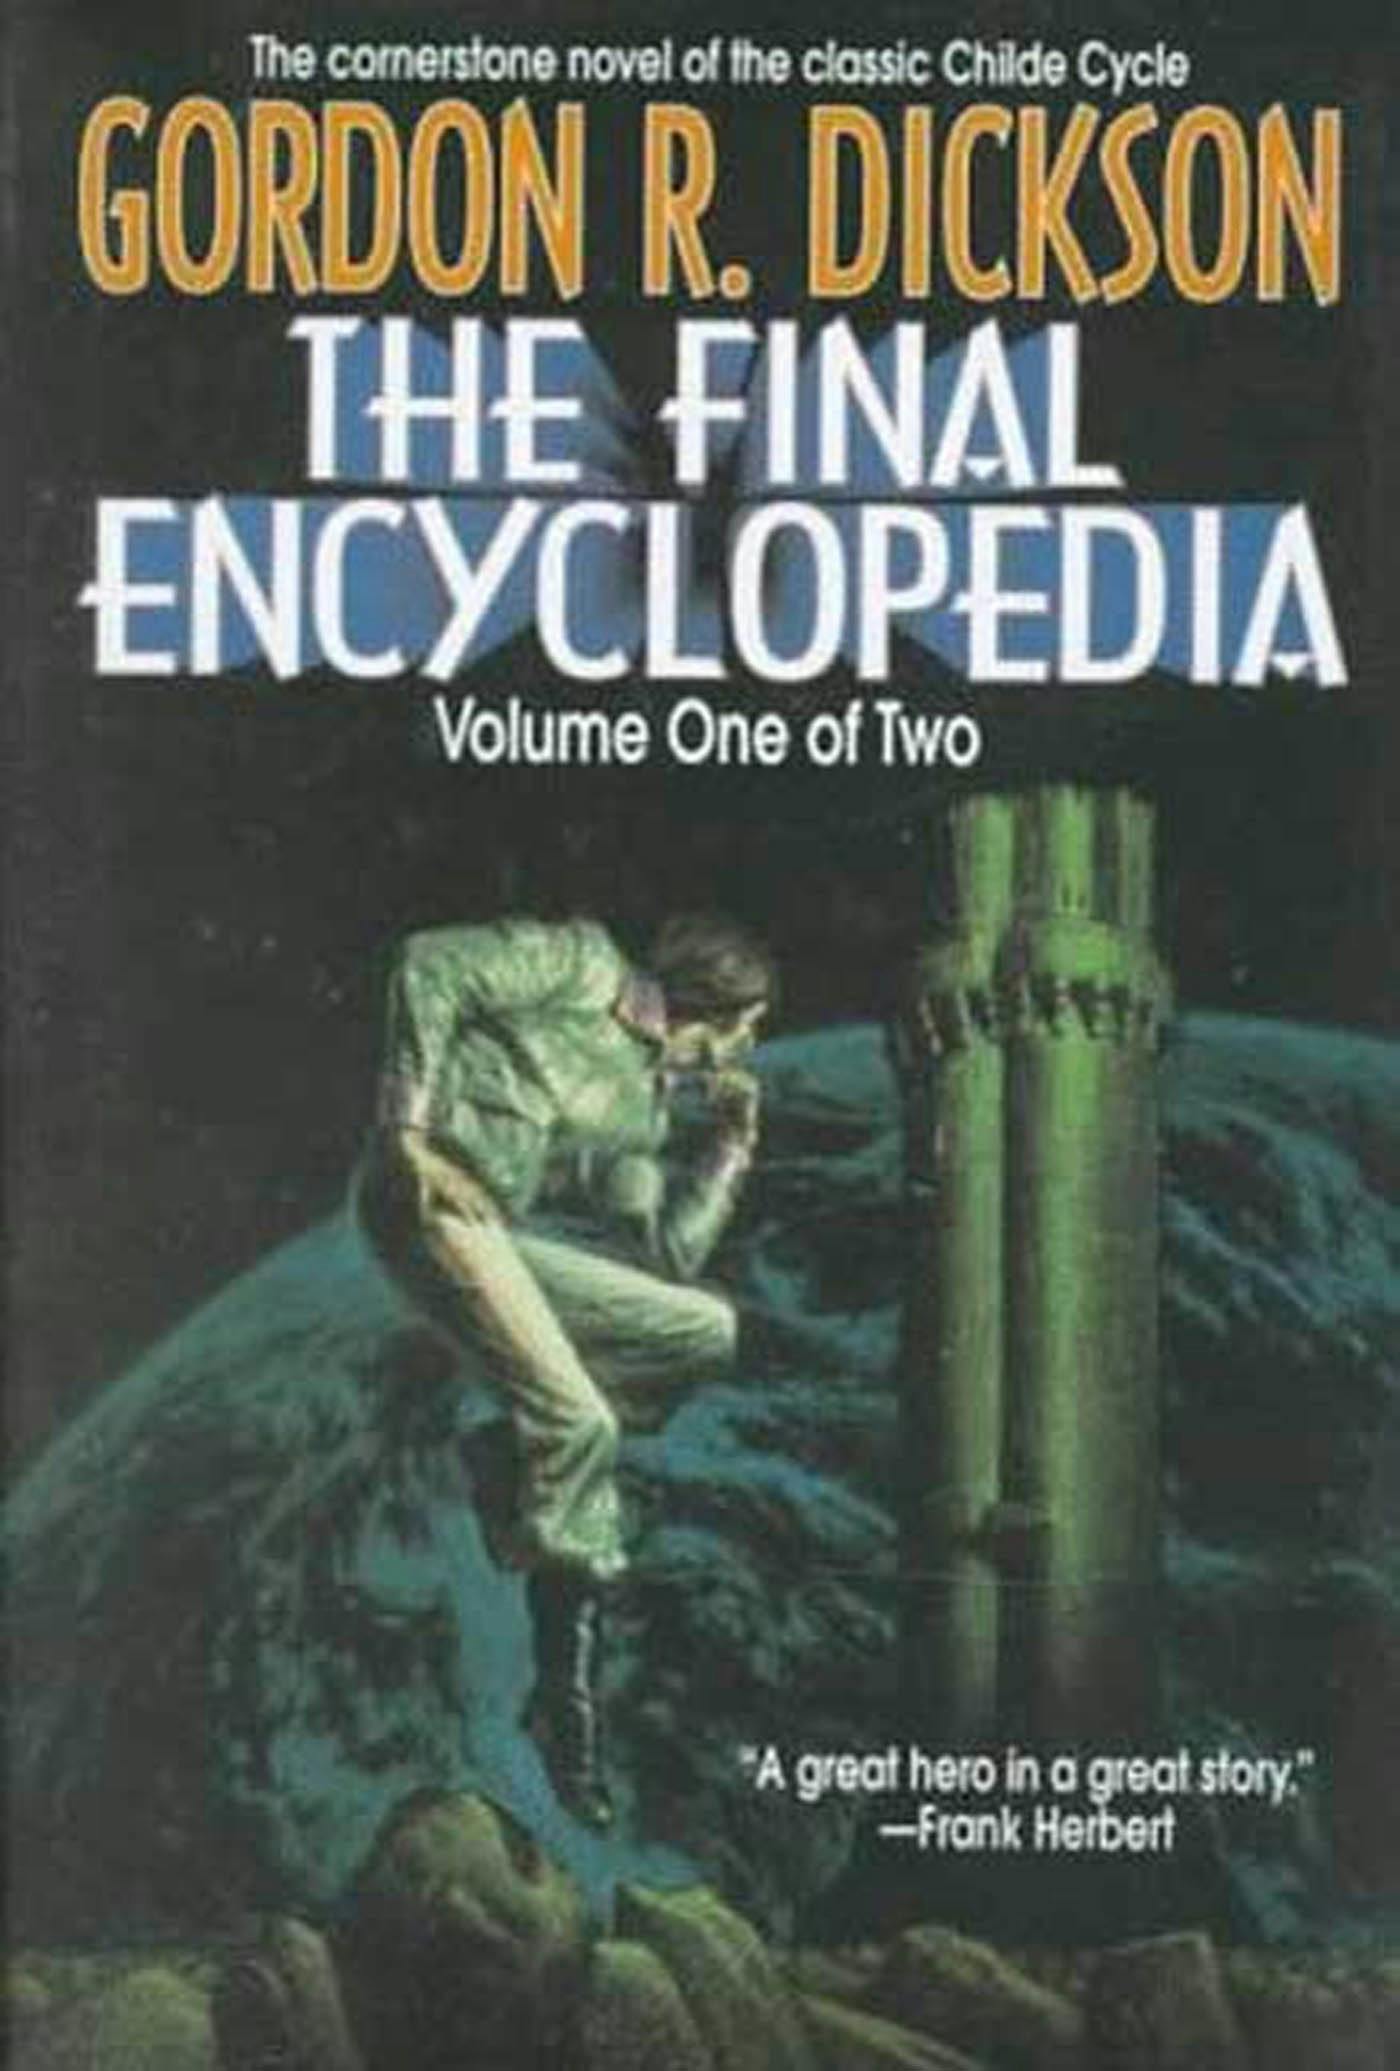 Cover for the book titled as: The Final Encyclopedia, Volume One of Two